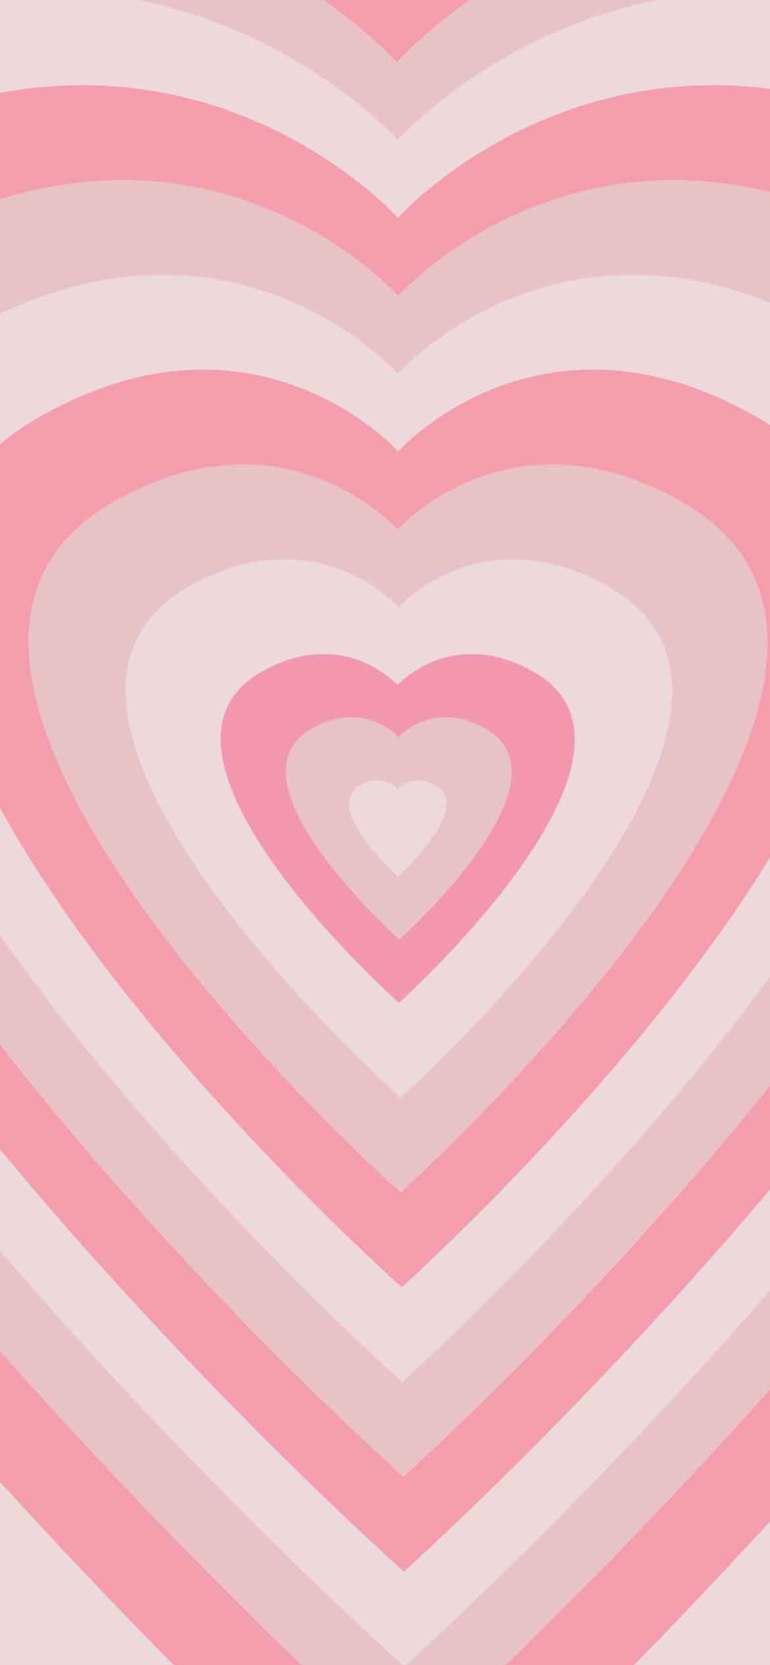 Pink Aesthetic Pictures Layered Heart Shapes Wallpaper For